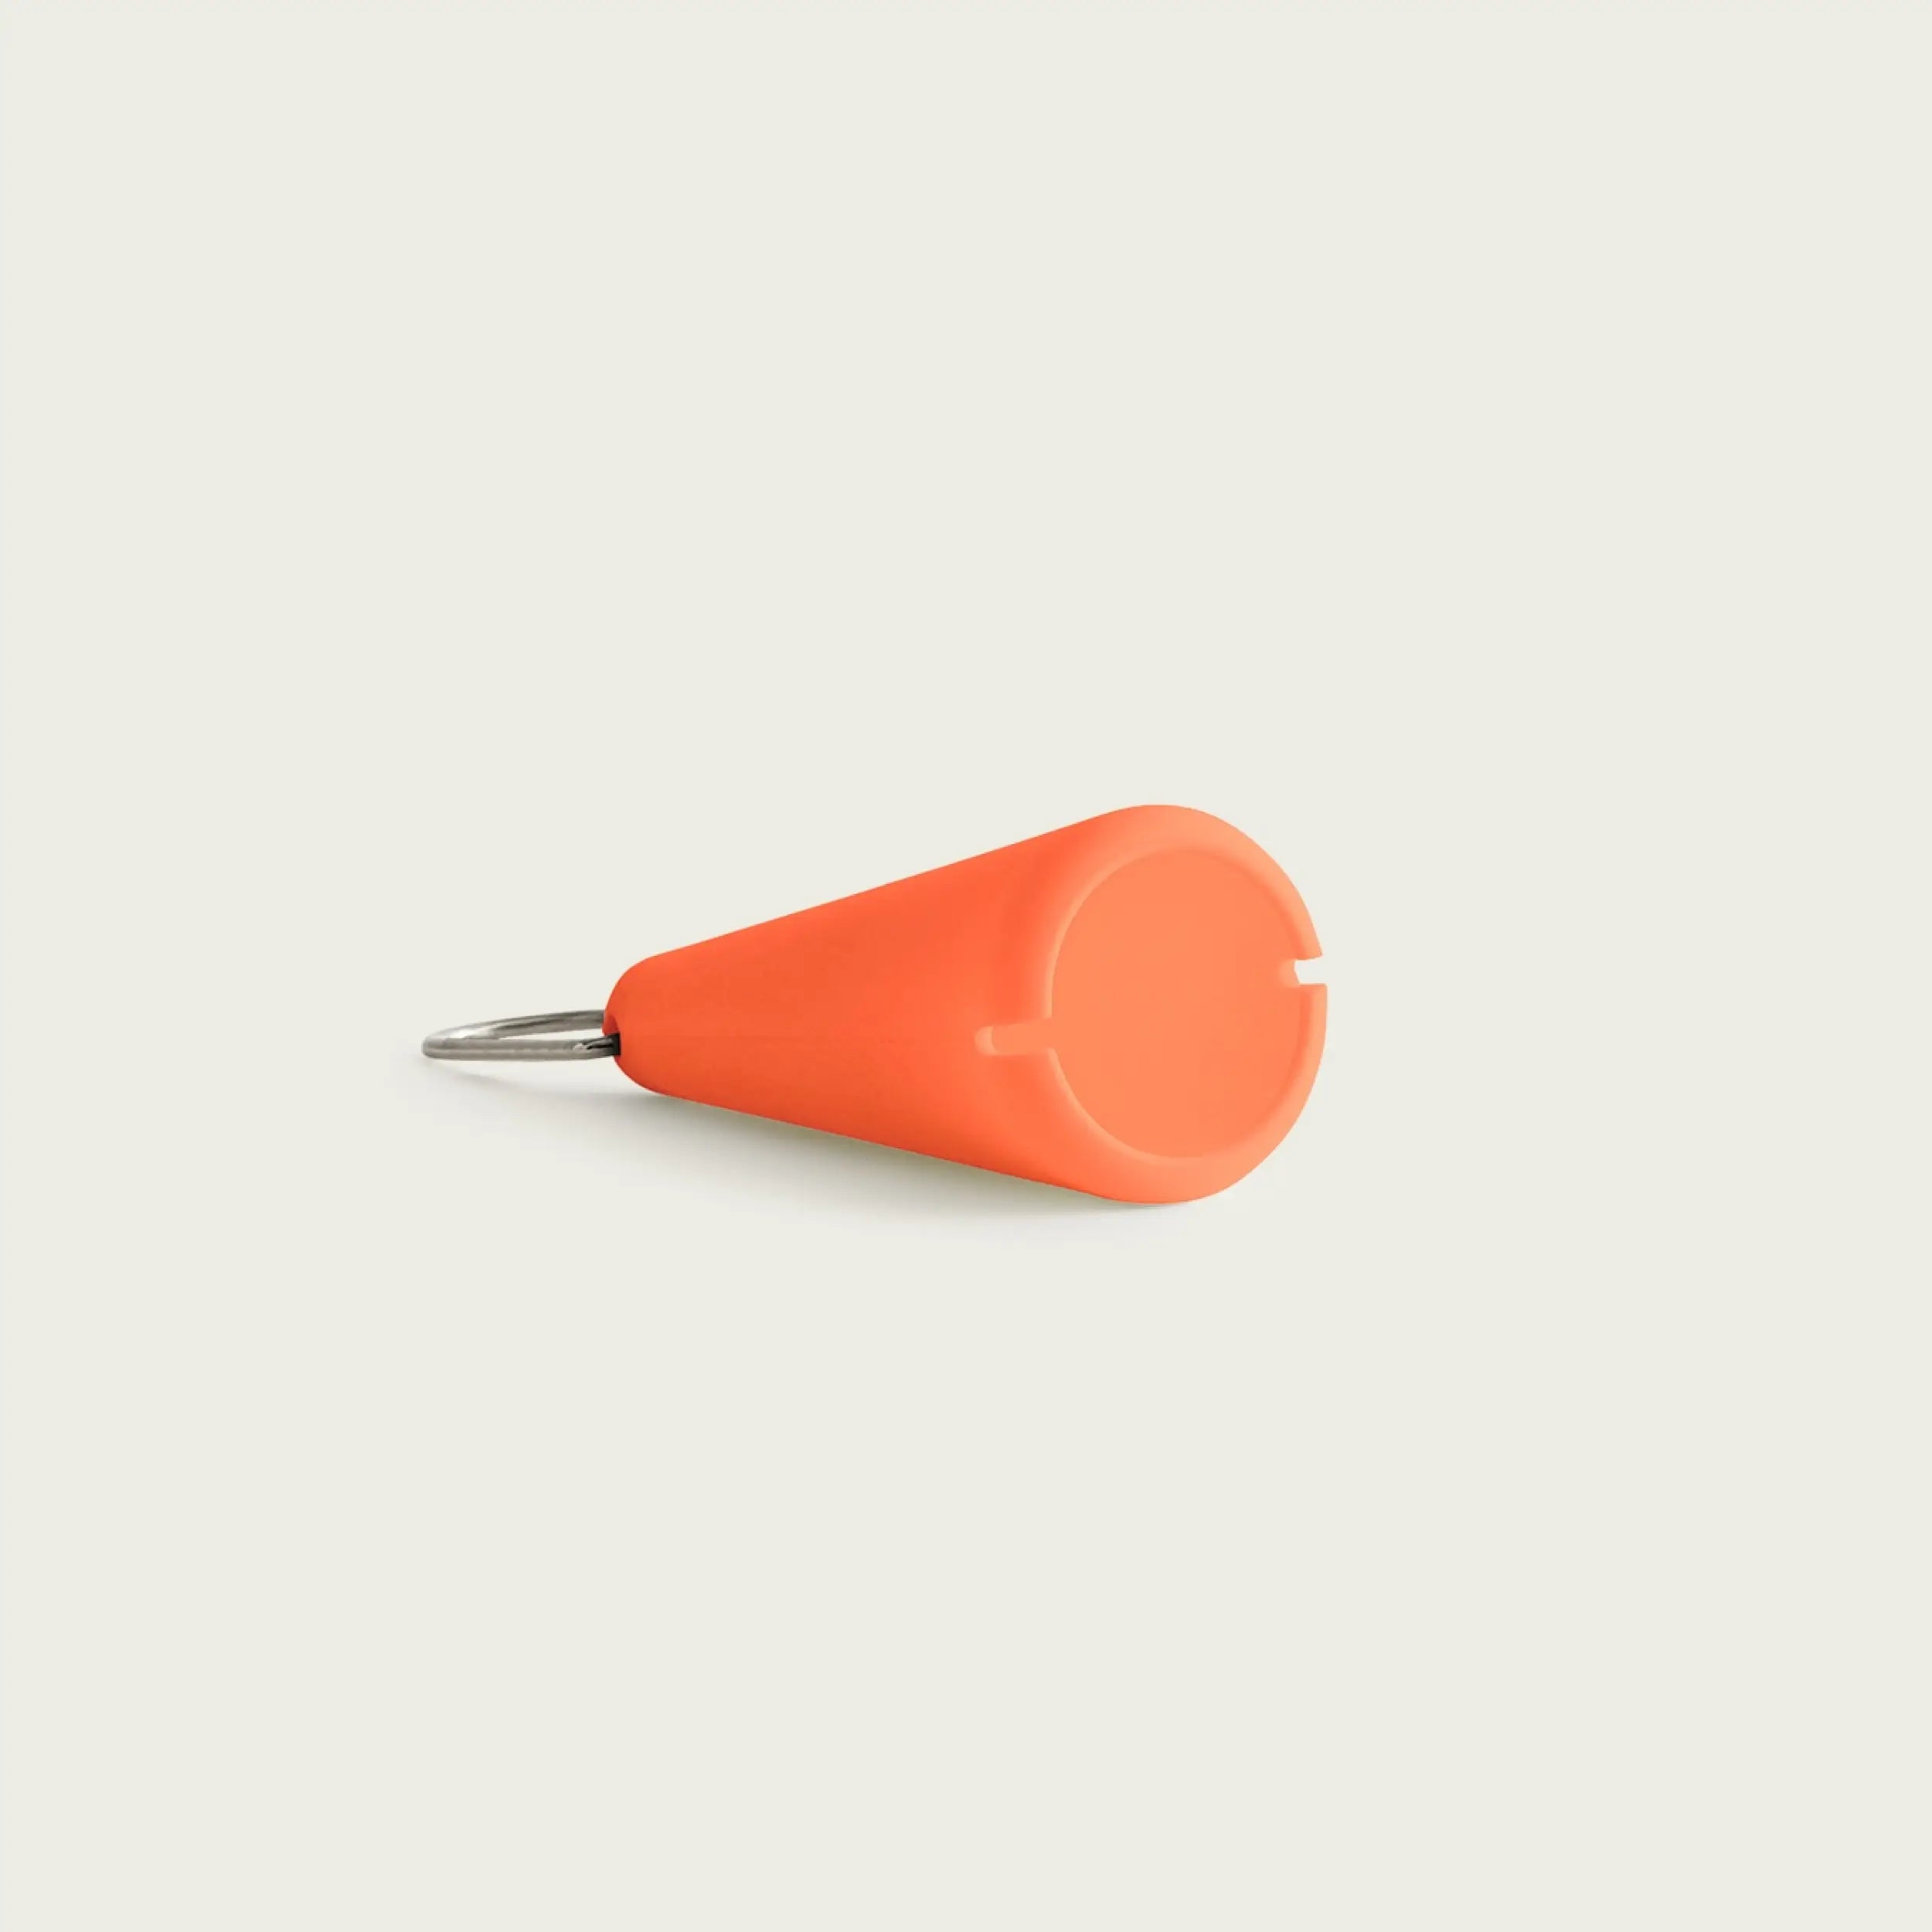 Session Goods Horizon Orange Silicone Sleeve: Elevate and Safeguard Your Smoking Experience.